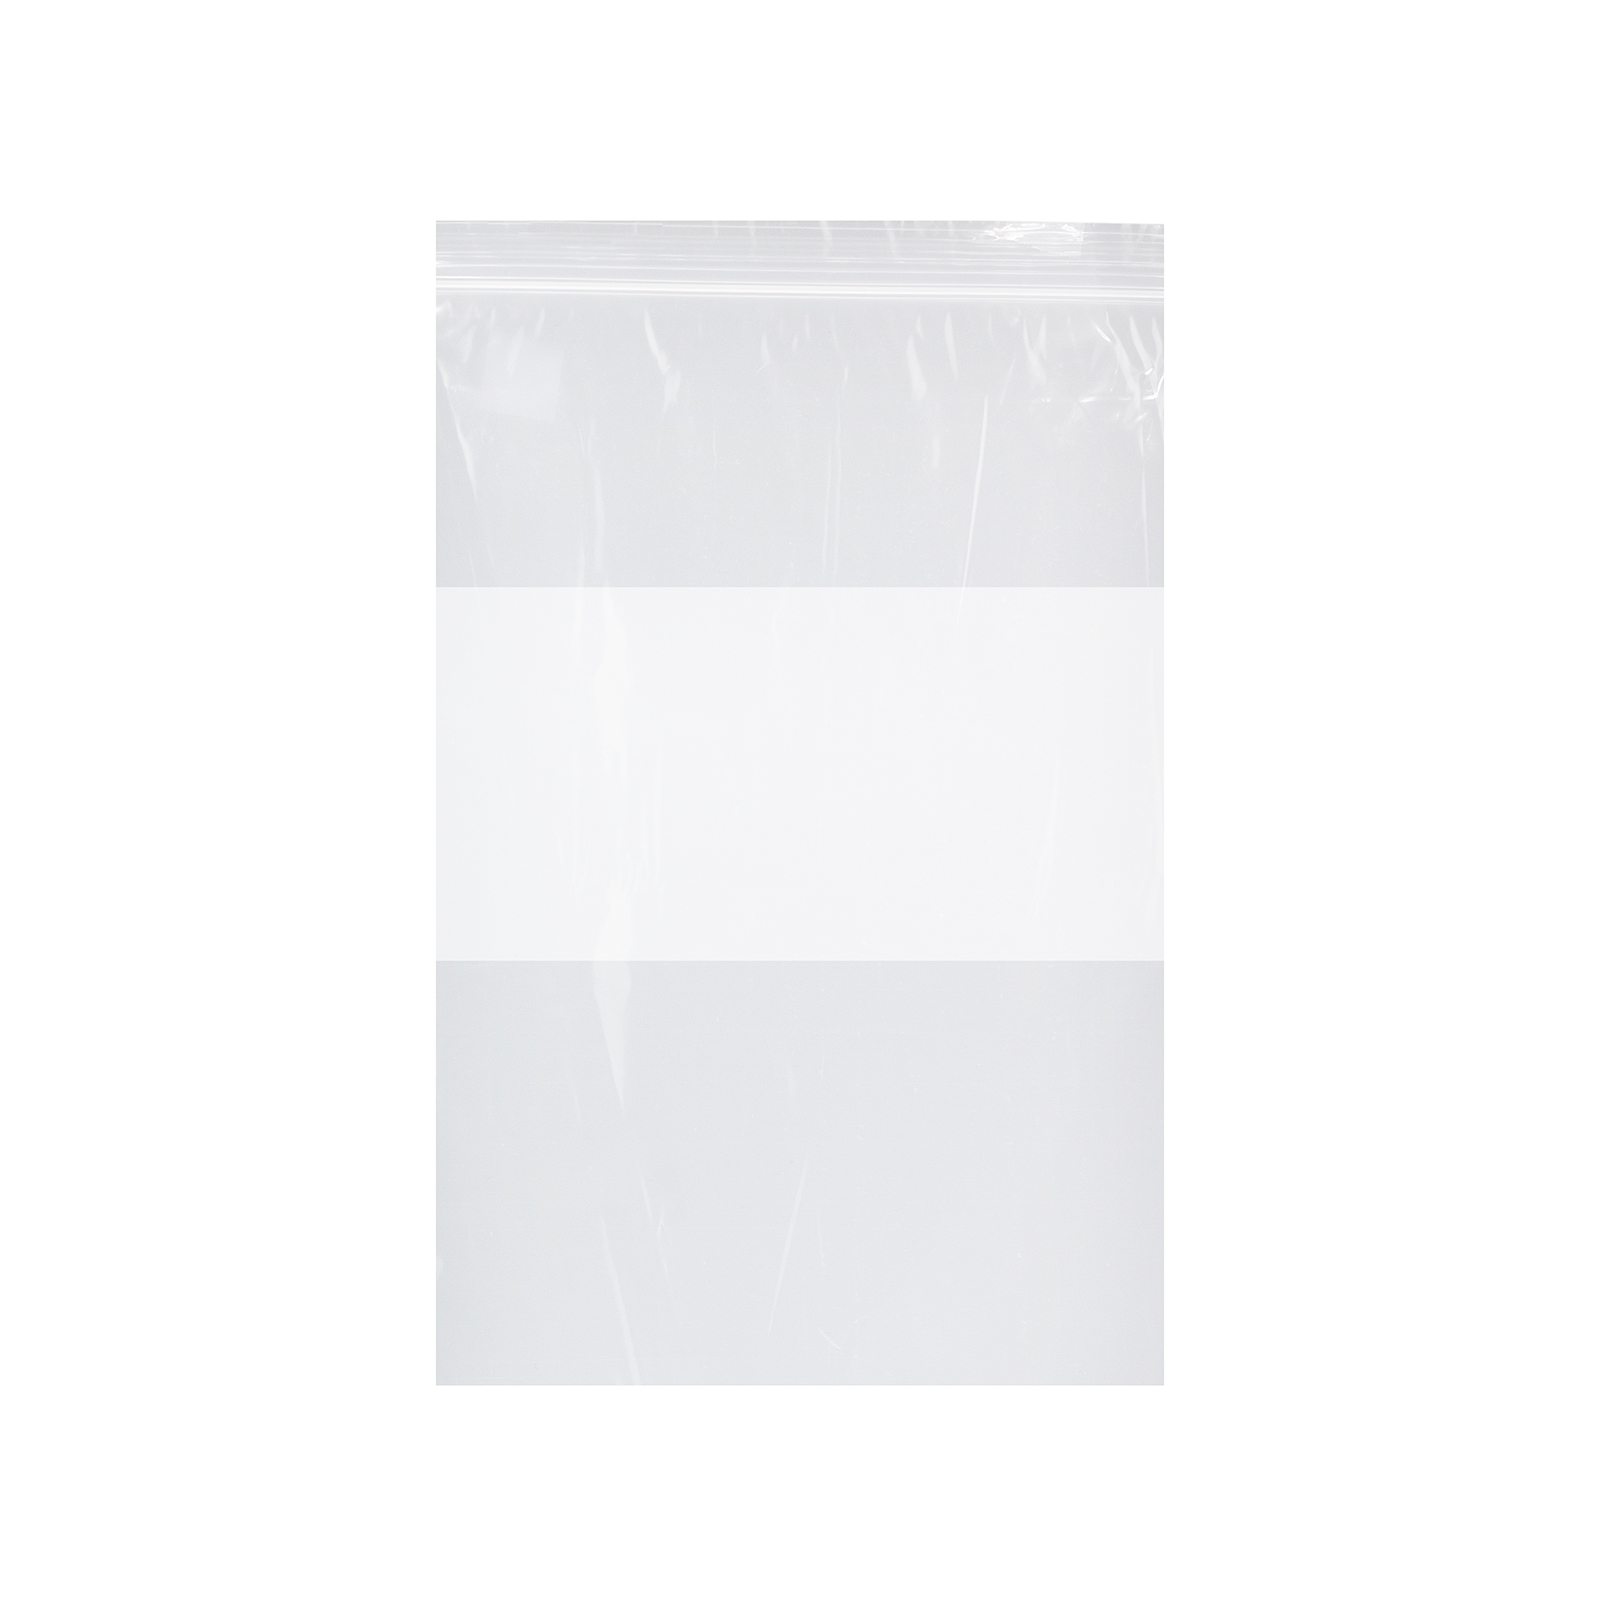 Dukal DawnMist Plastic Zip Closure Bags, 8" x 10", Clear with Write-On Block, Bag of 100